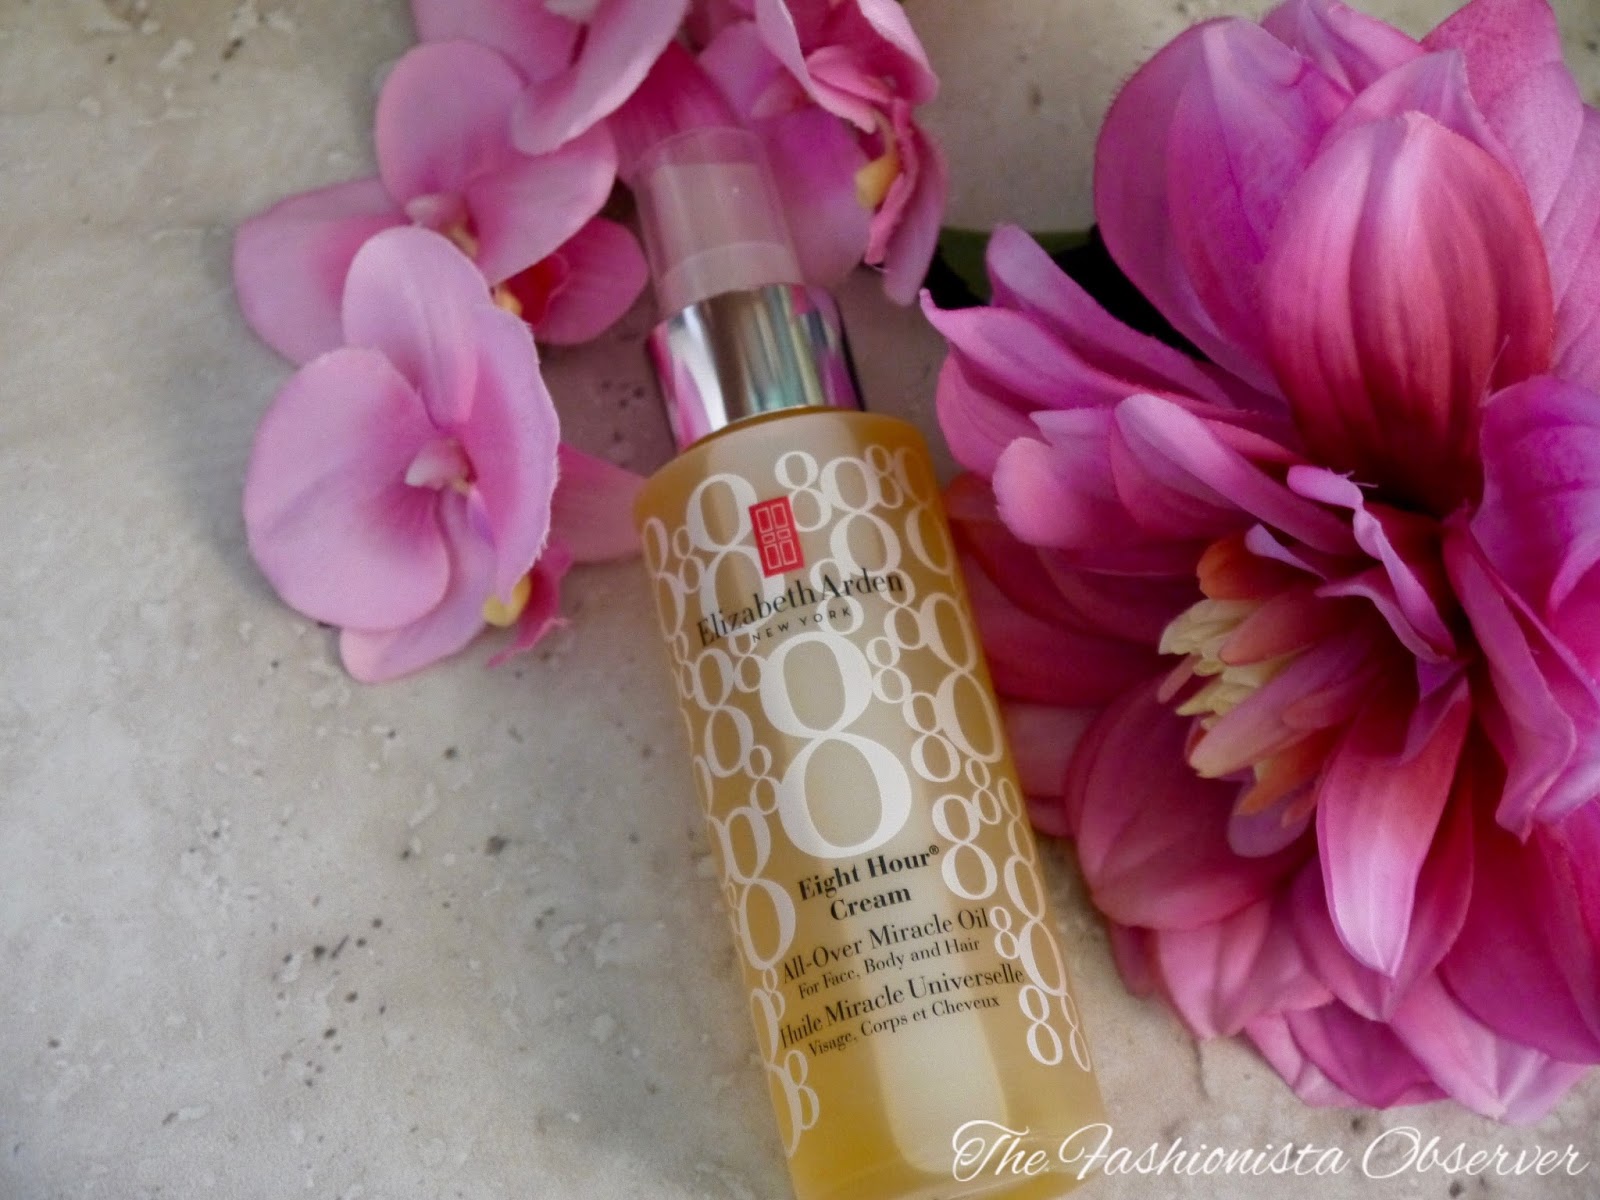 Elizabeth Arden Eight Hour Cream All Over Miracle Oil Review